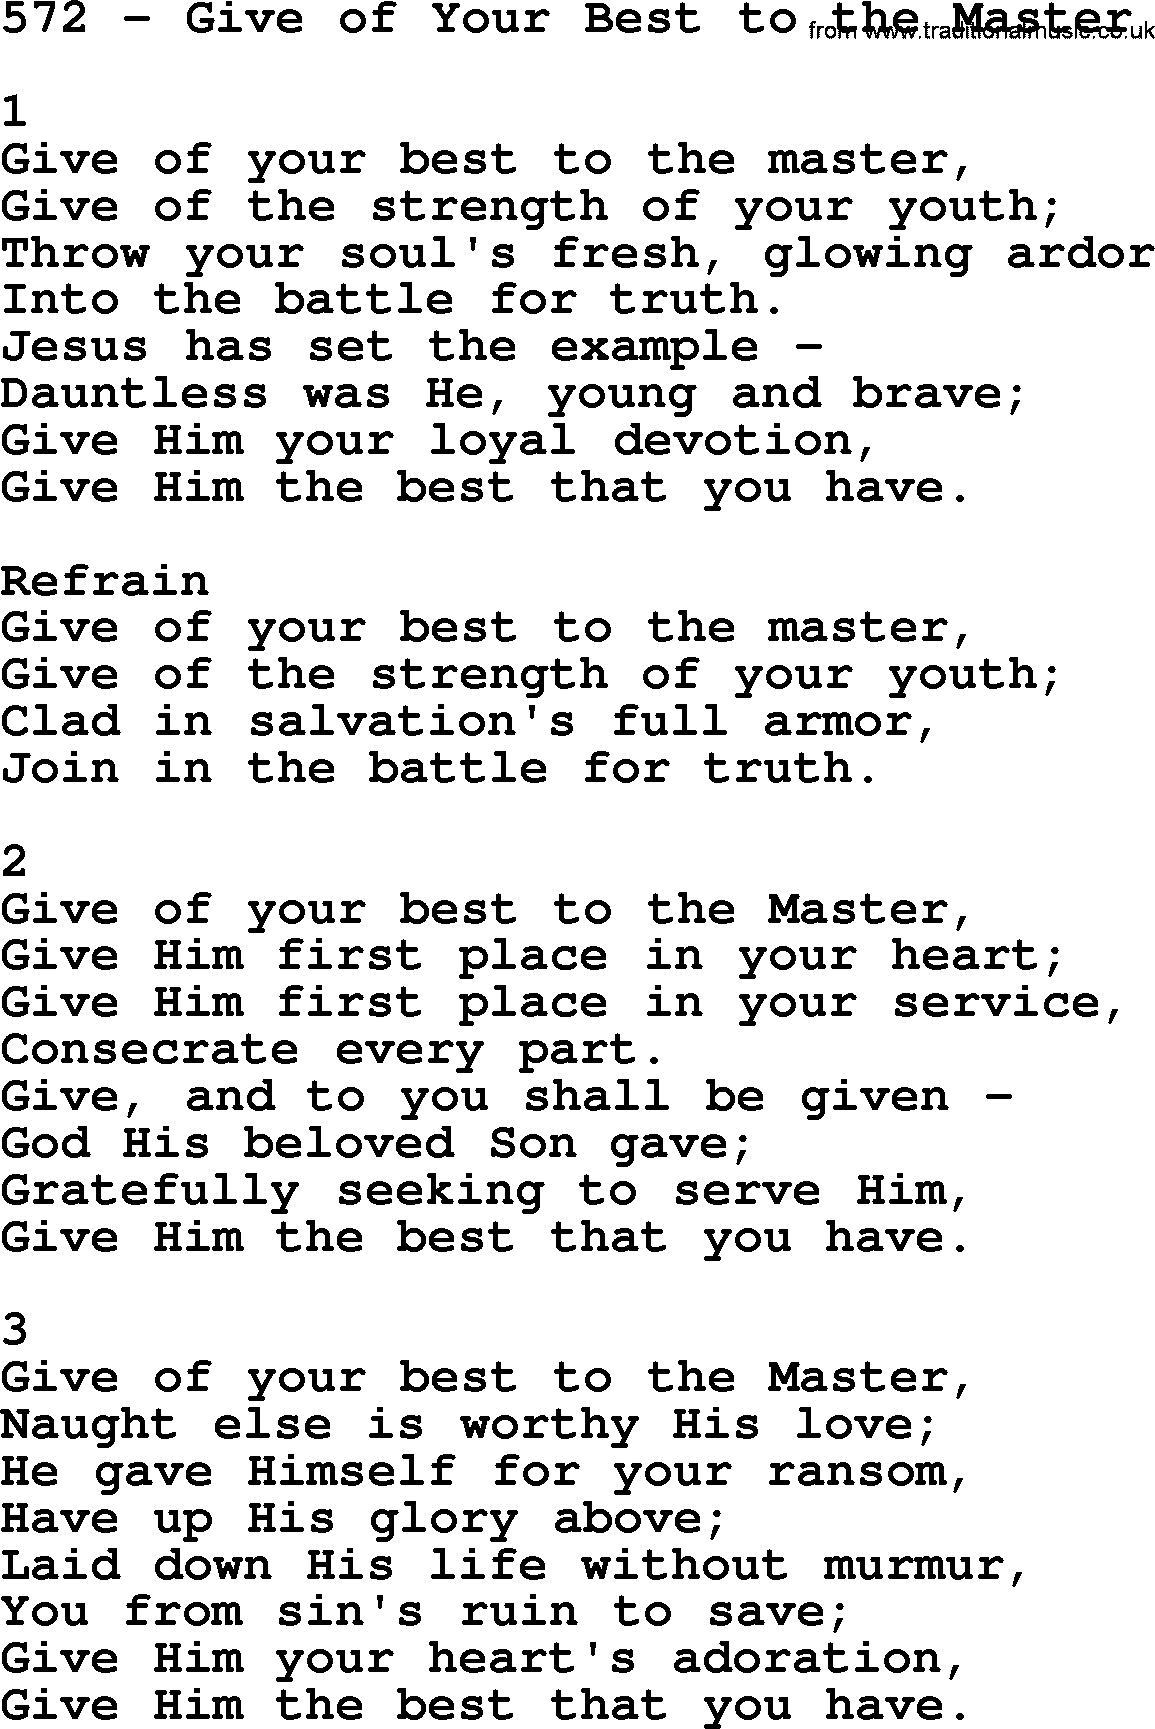 Complete Adventis Hymnal, title: 572-Give Of Your Best To The Master, with lyrics, midi, mp3, powerpoints(PPT) and PDF,